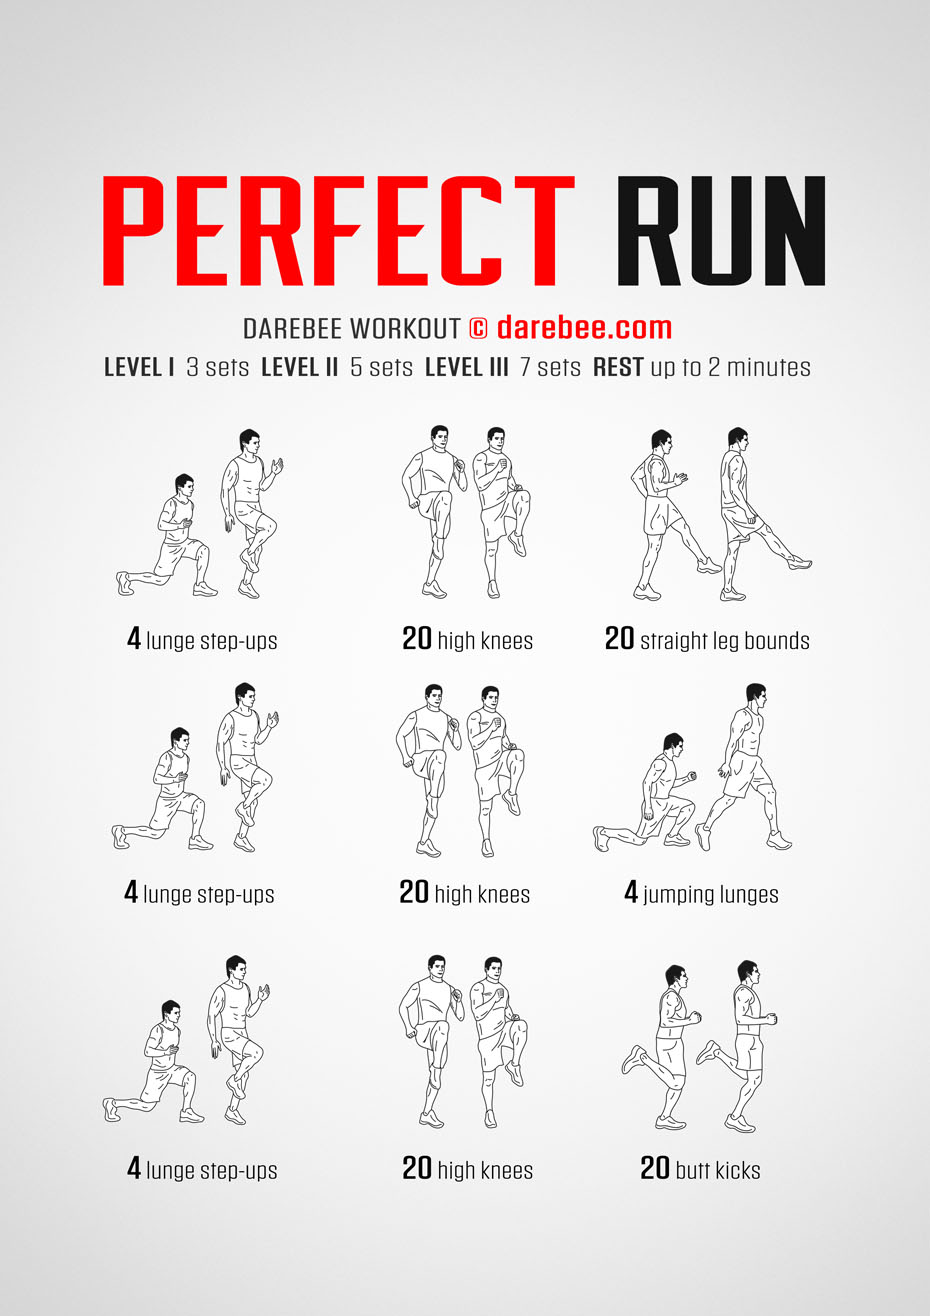 Perfect Run is a Darebee no-equipment, home-fitness workout that targets all the muscles, tendons and ligaments of the body.